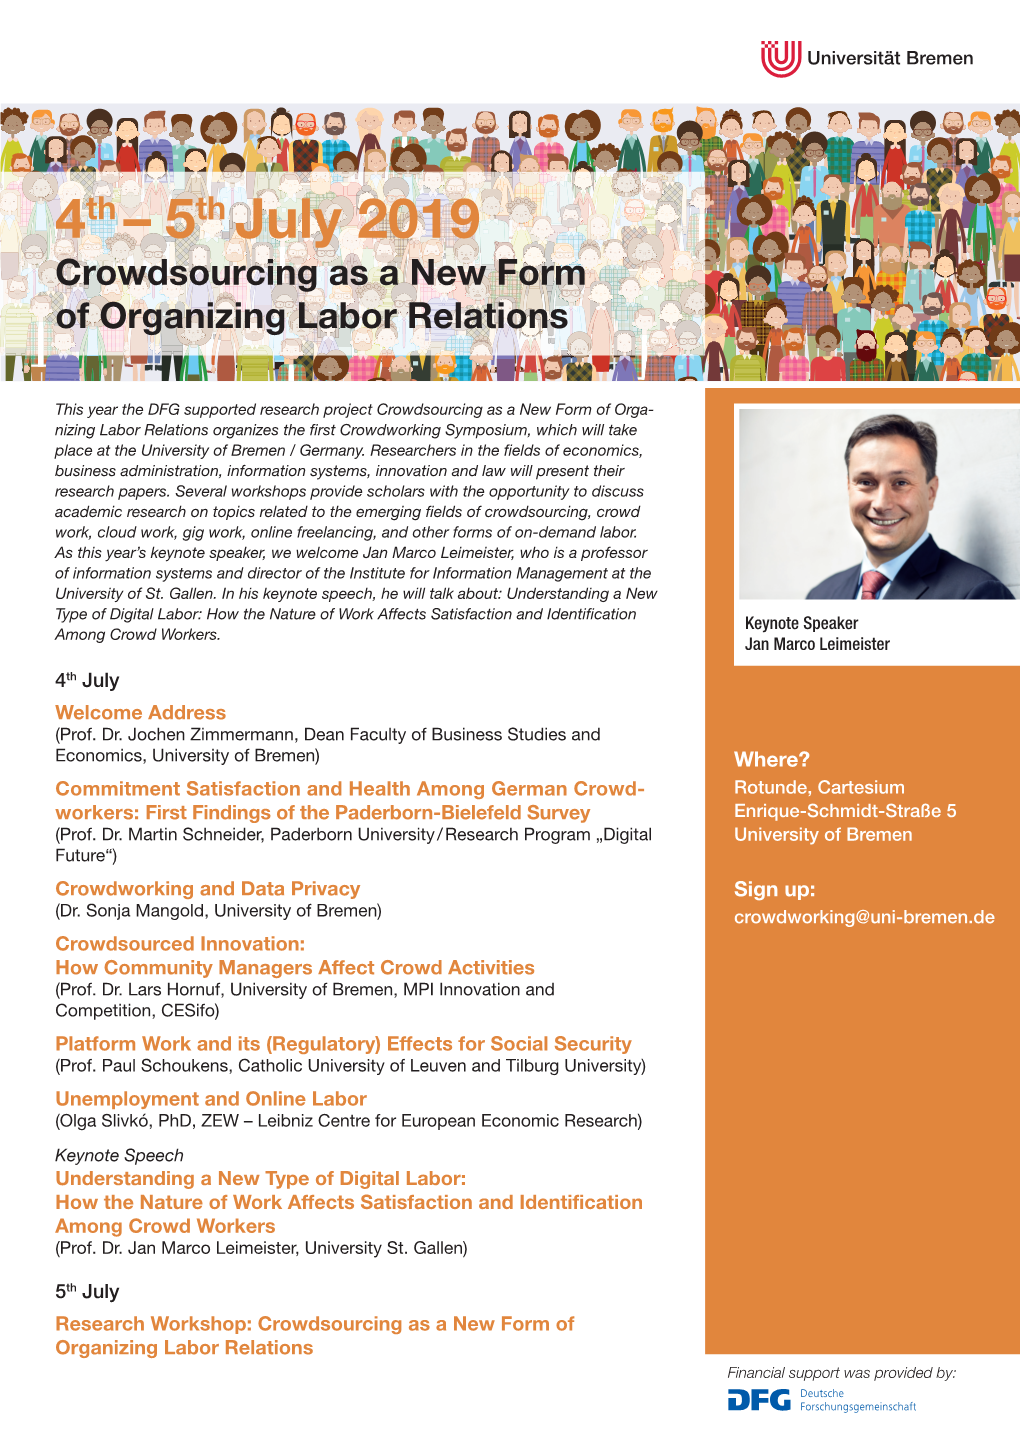 4Th – 5Th July 2019 Crowdsourcing As a New Form of Organizing Labor Relations